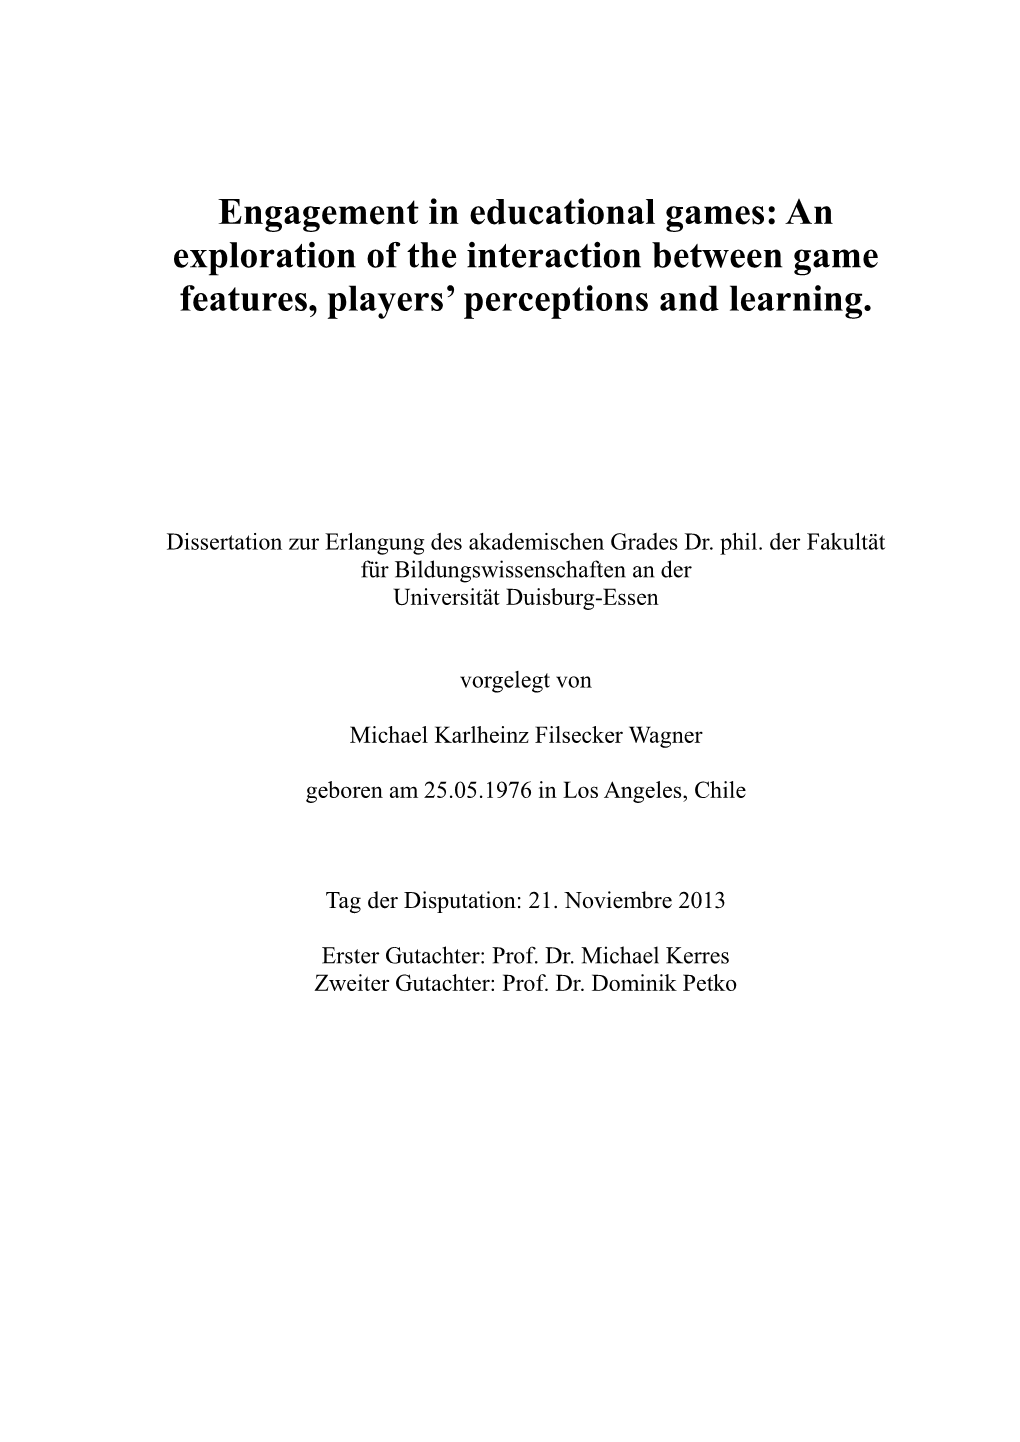 Engagement in Educational Games: an Exploration of the Interaction Between Game Features, Players' Perceptions and Learning